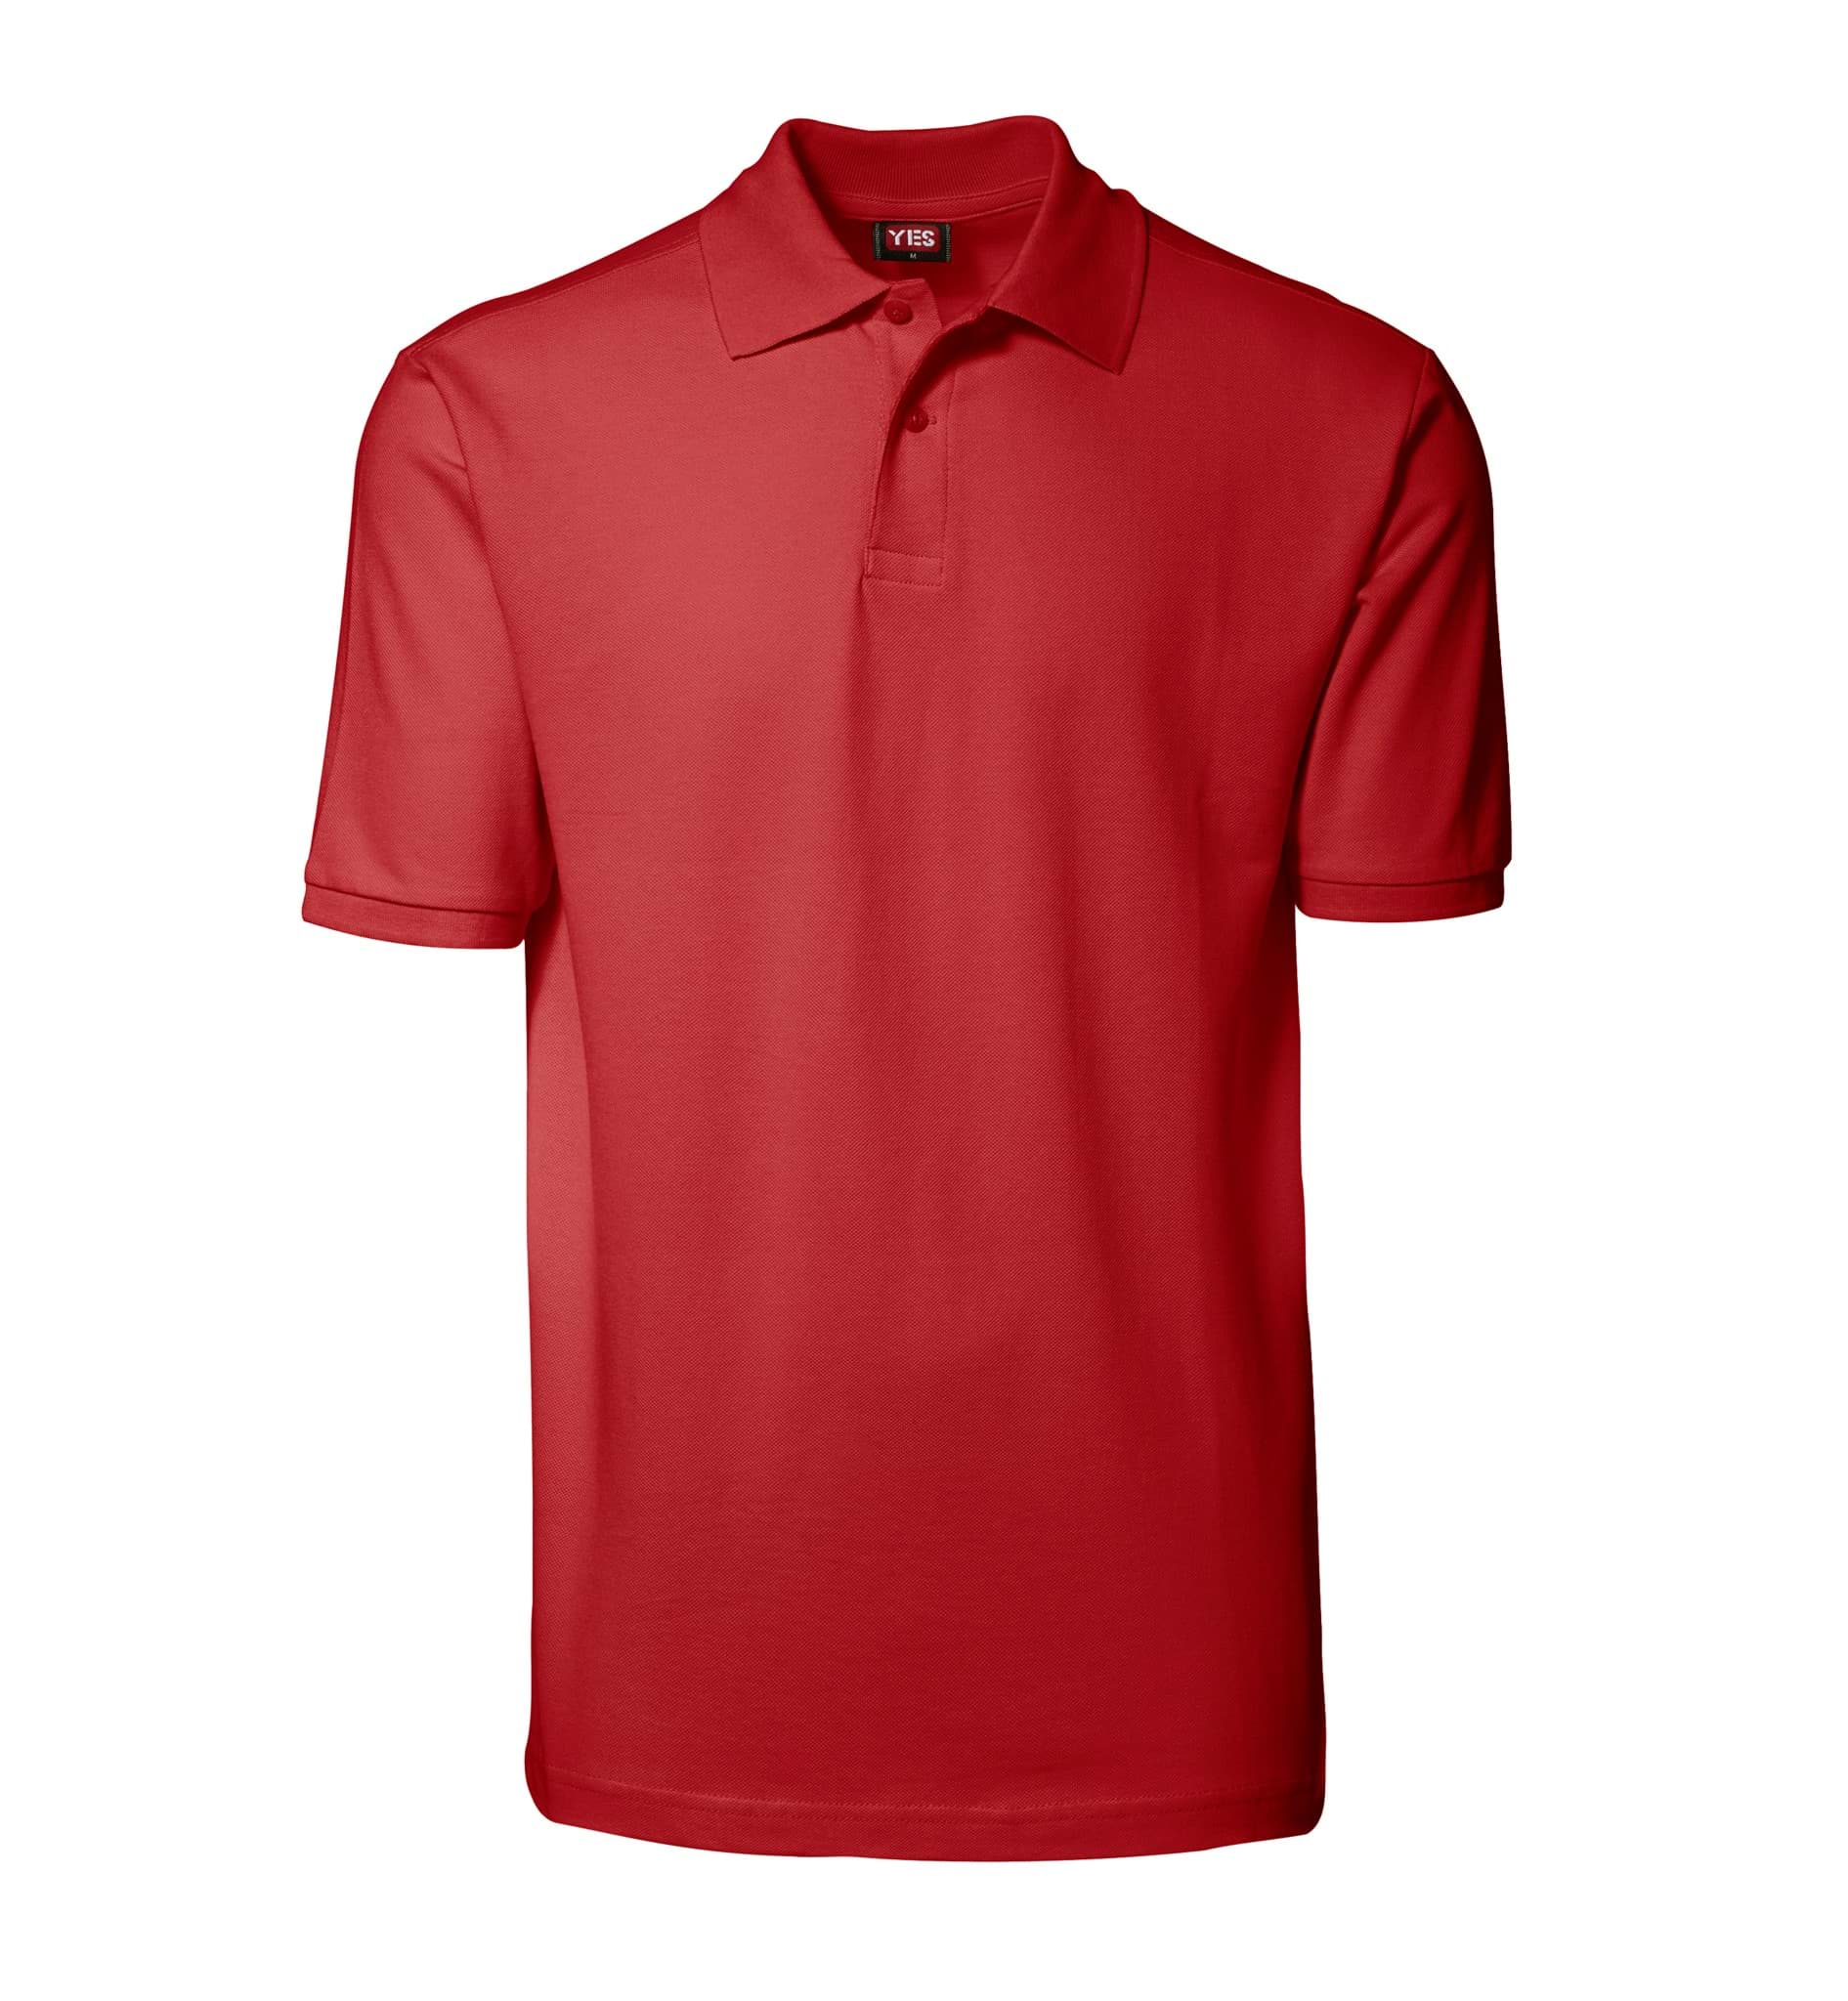 Picture of Promotion YES men's polo shirt